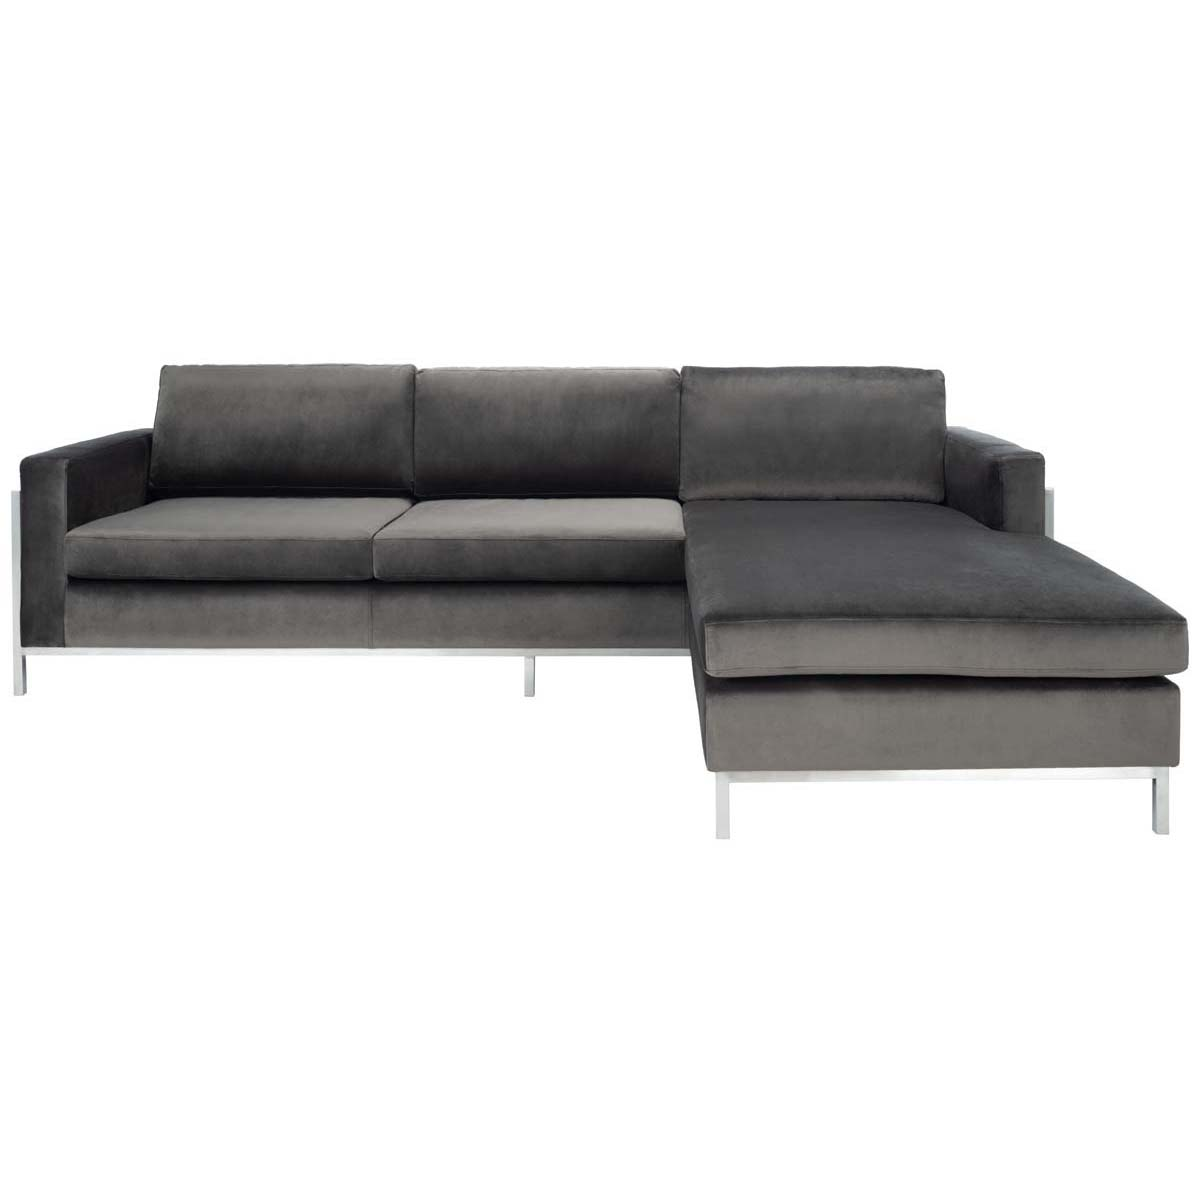 Safavieh Couture Camila Poly Blend Sectional